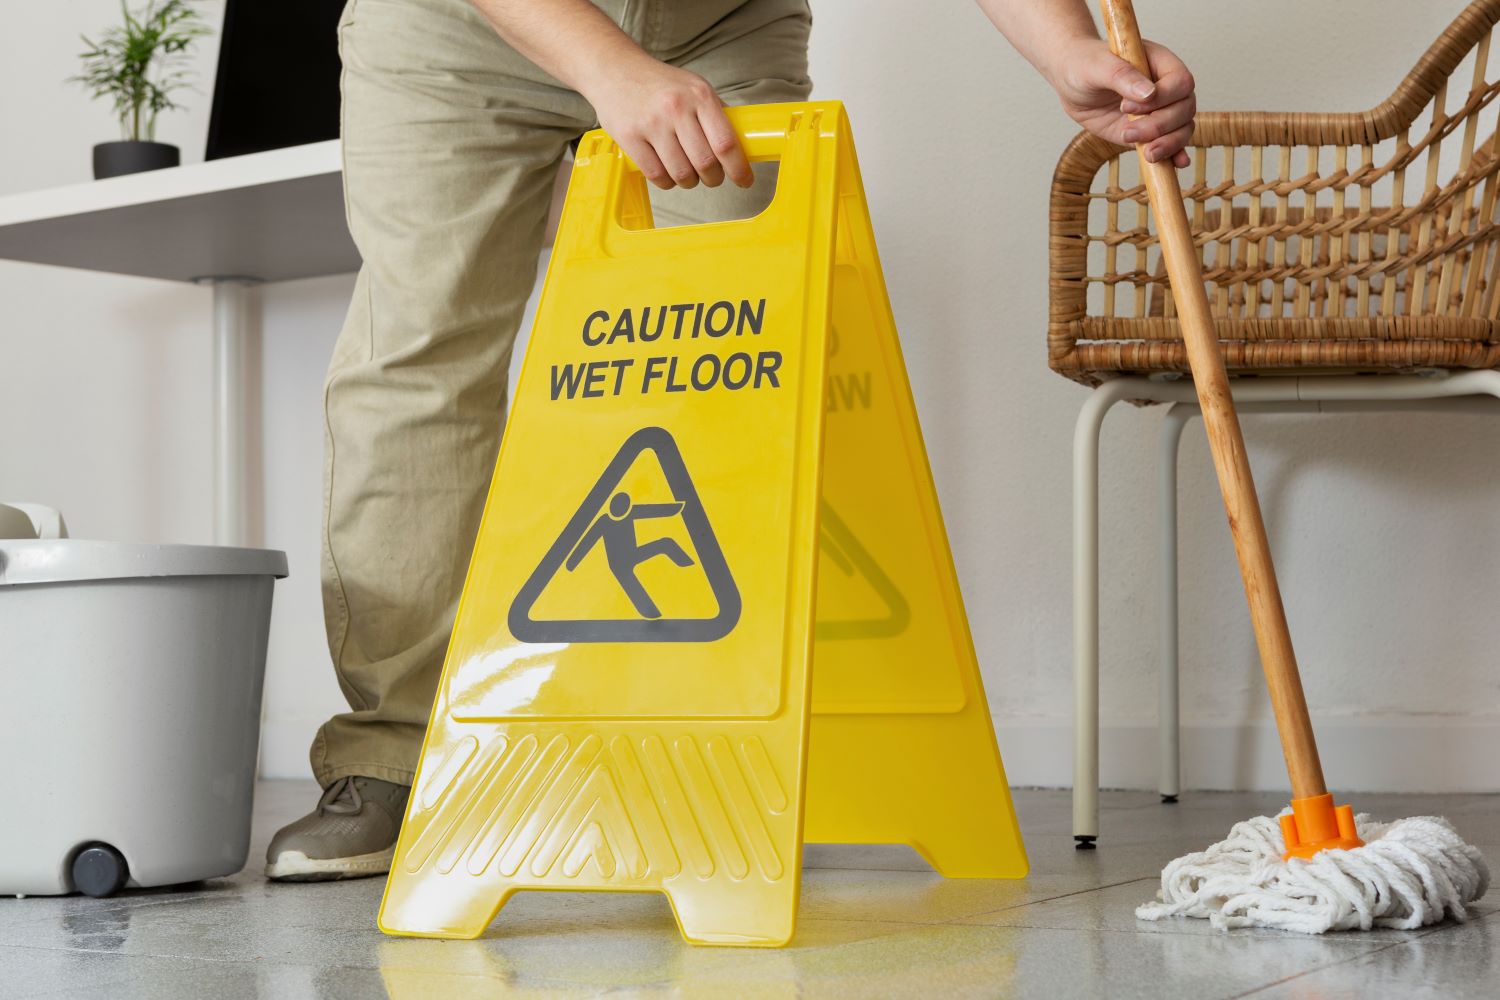 Bathroom accidents are not uncommon, and one of the main culprits is slippery floors